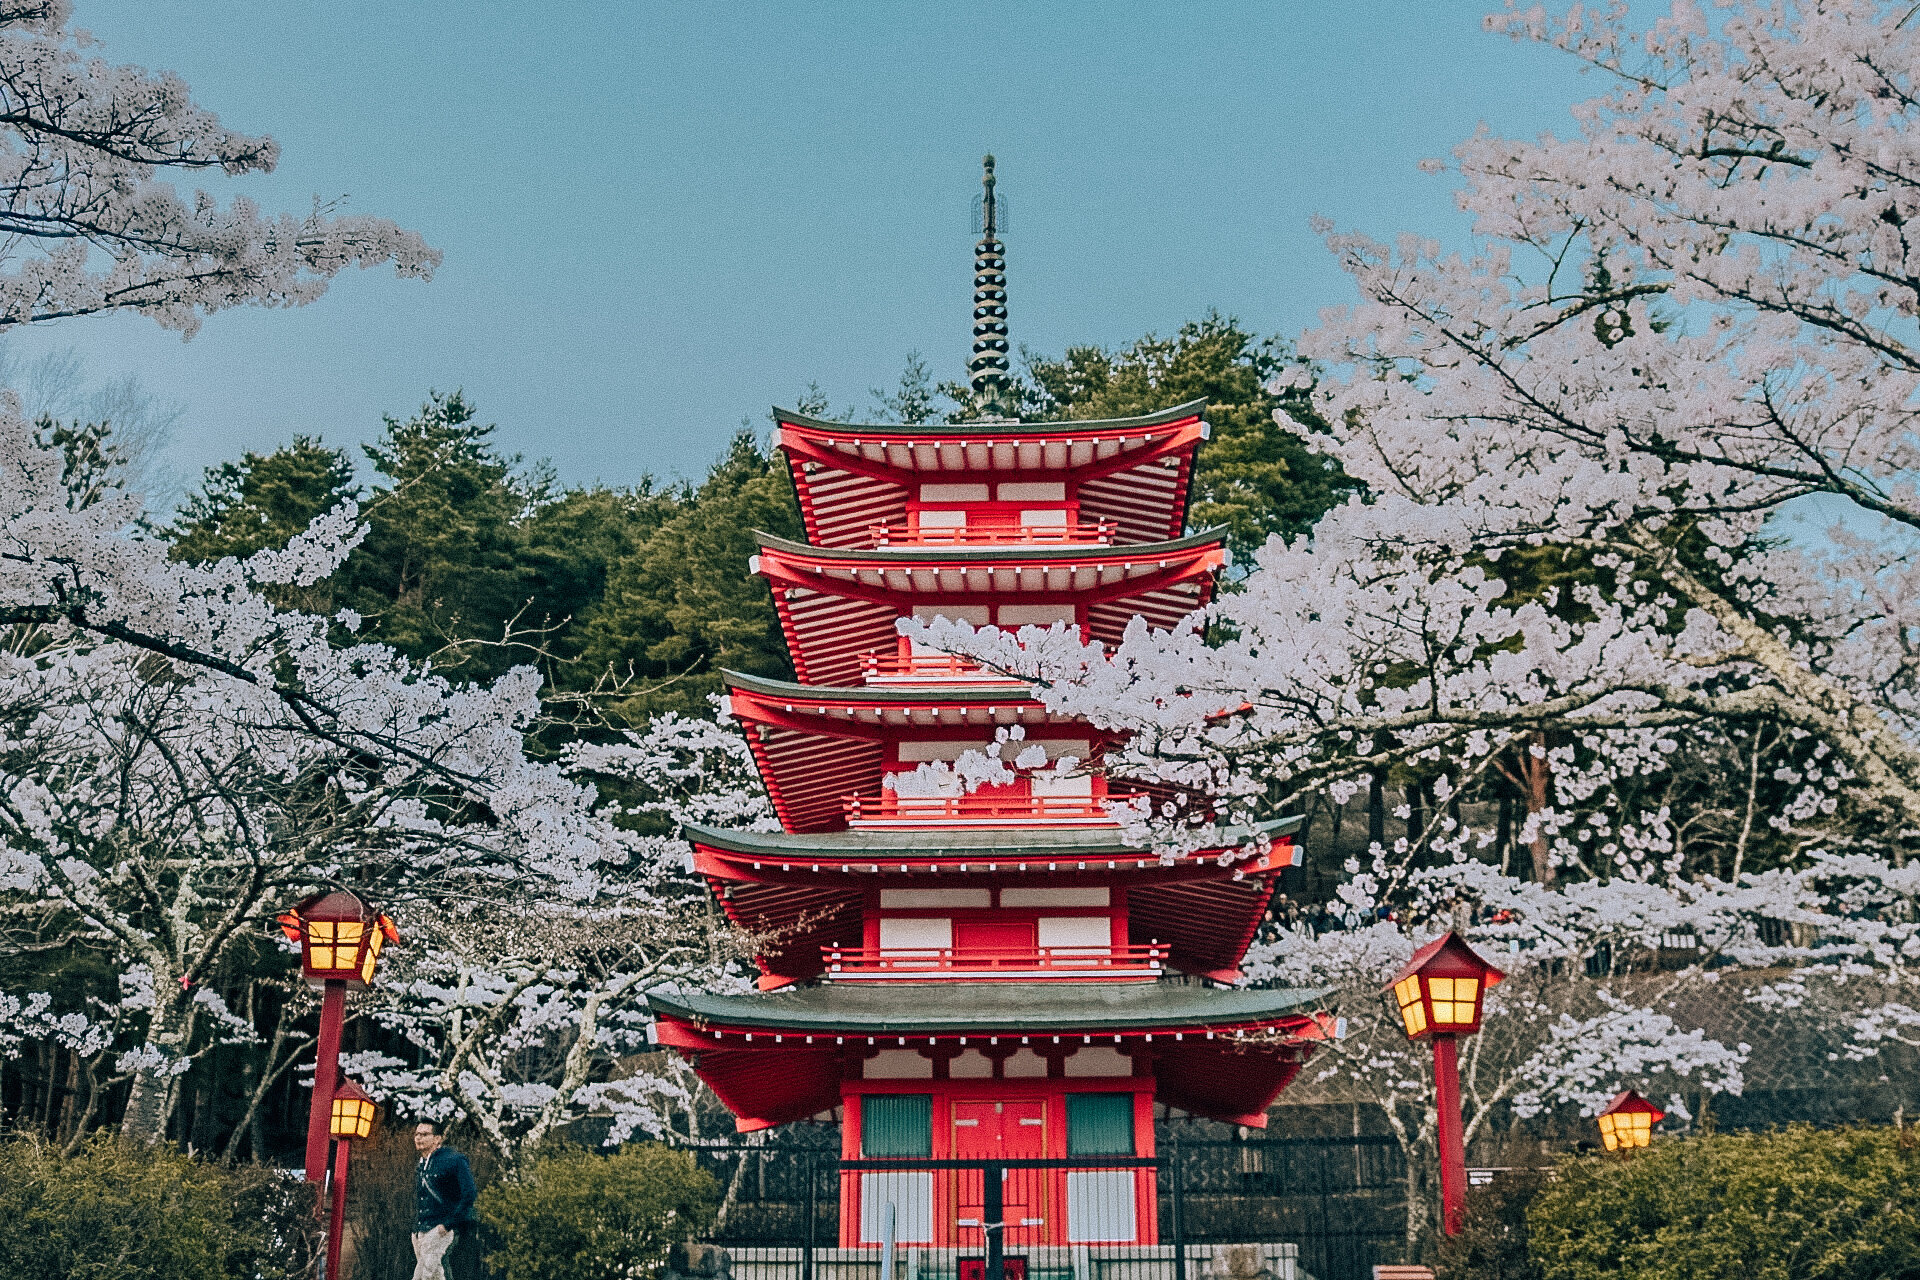 A tall red Japanese pagoda surrounded by pink cherry blossoms